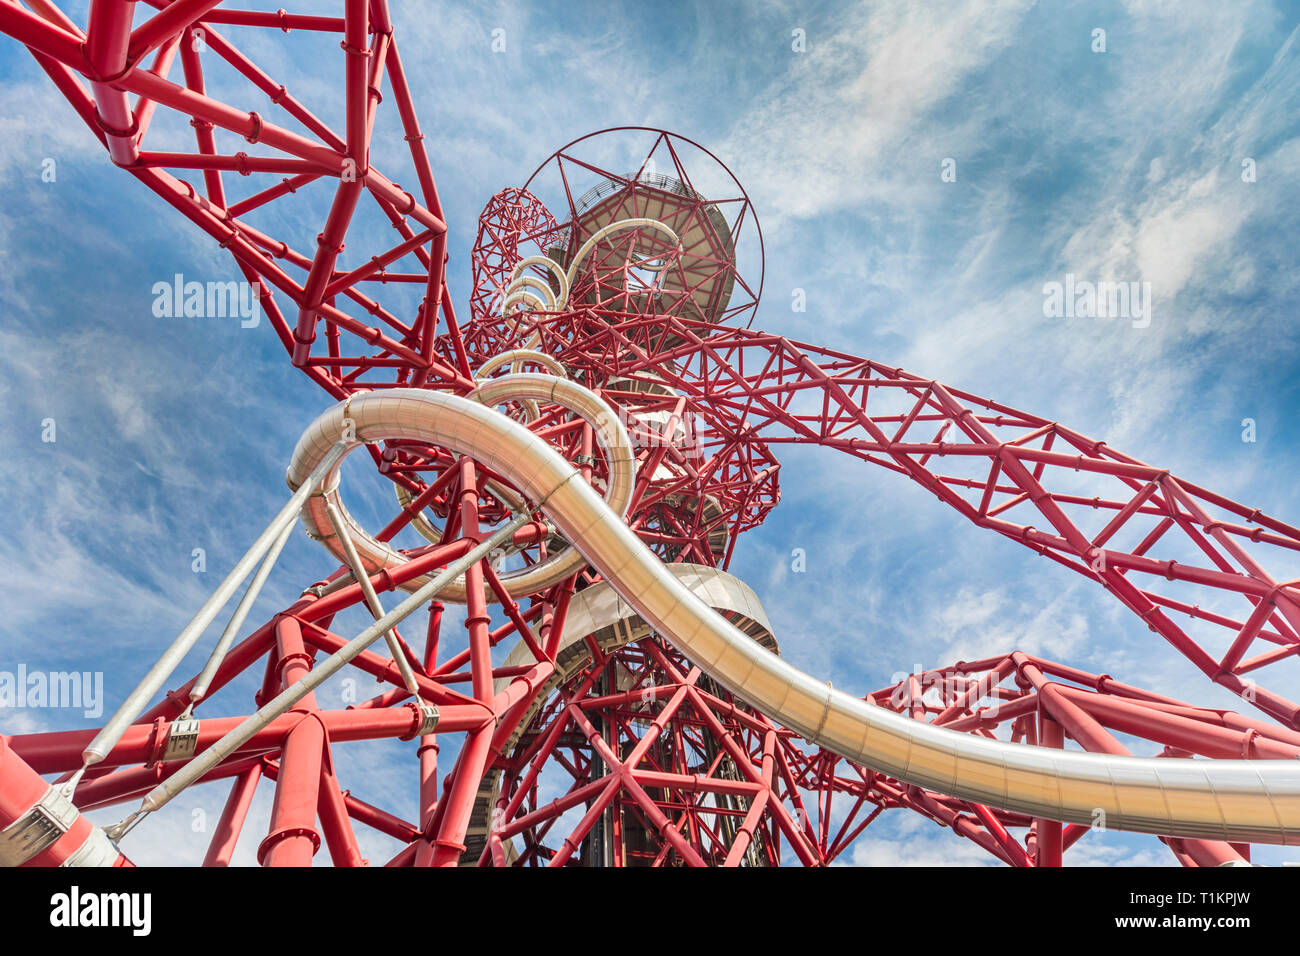 Arcelormittal orbit tower and slide in Queen Elizabeth Olympic Park. Stock Photo